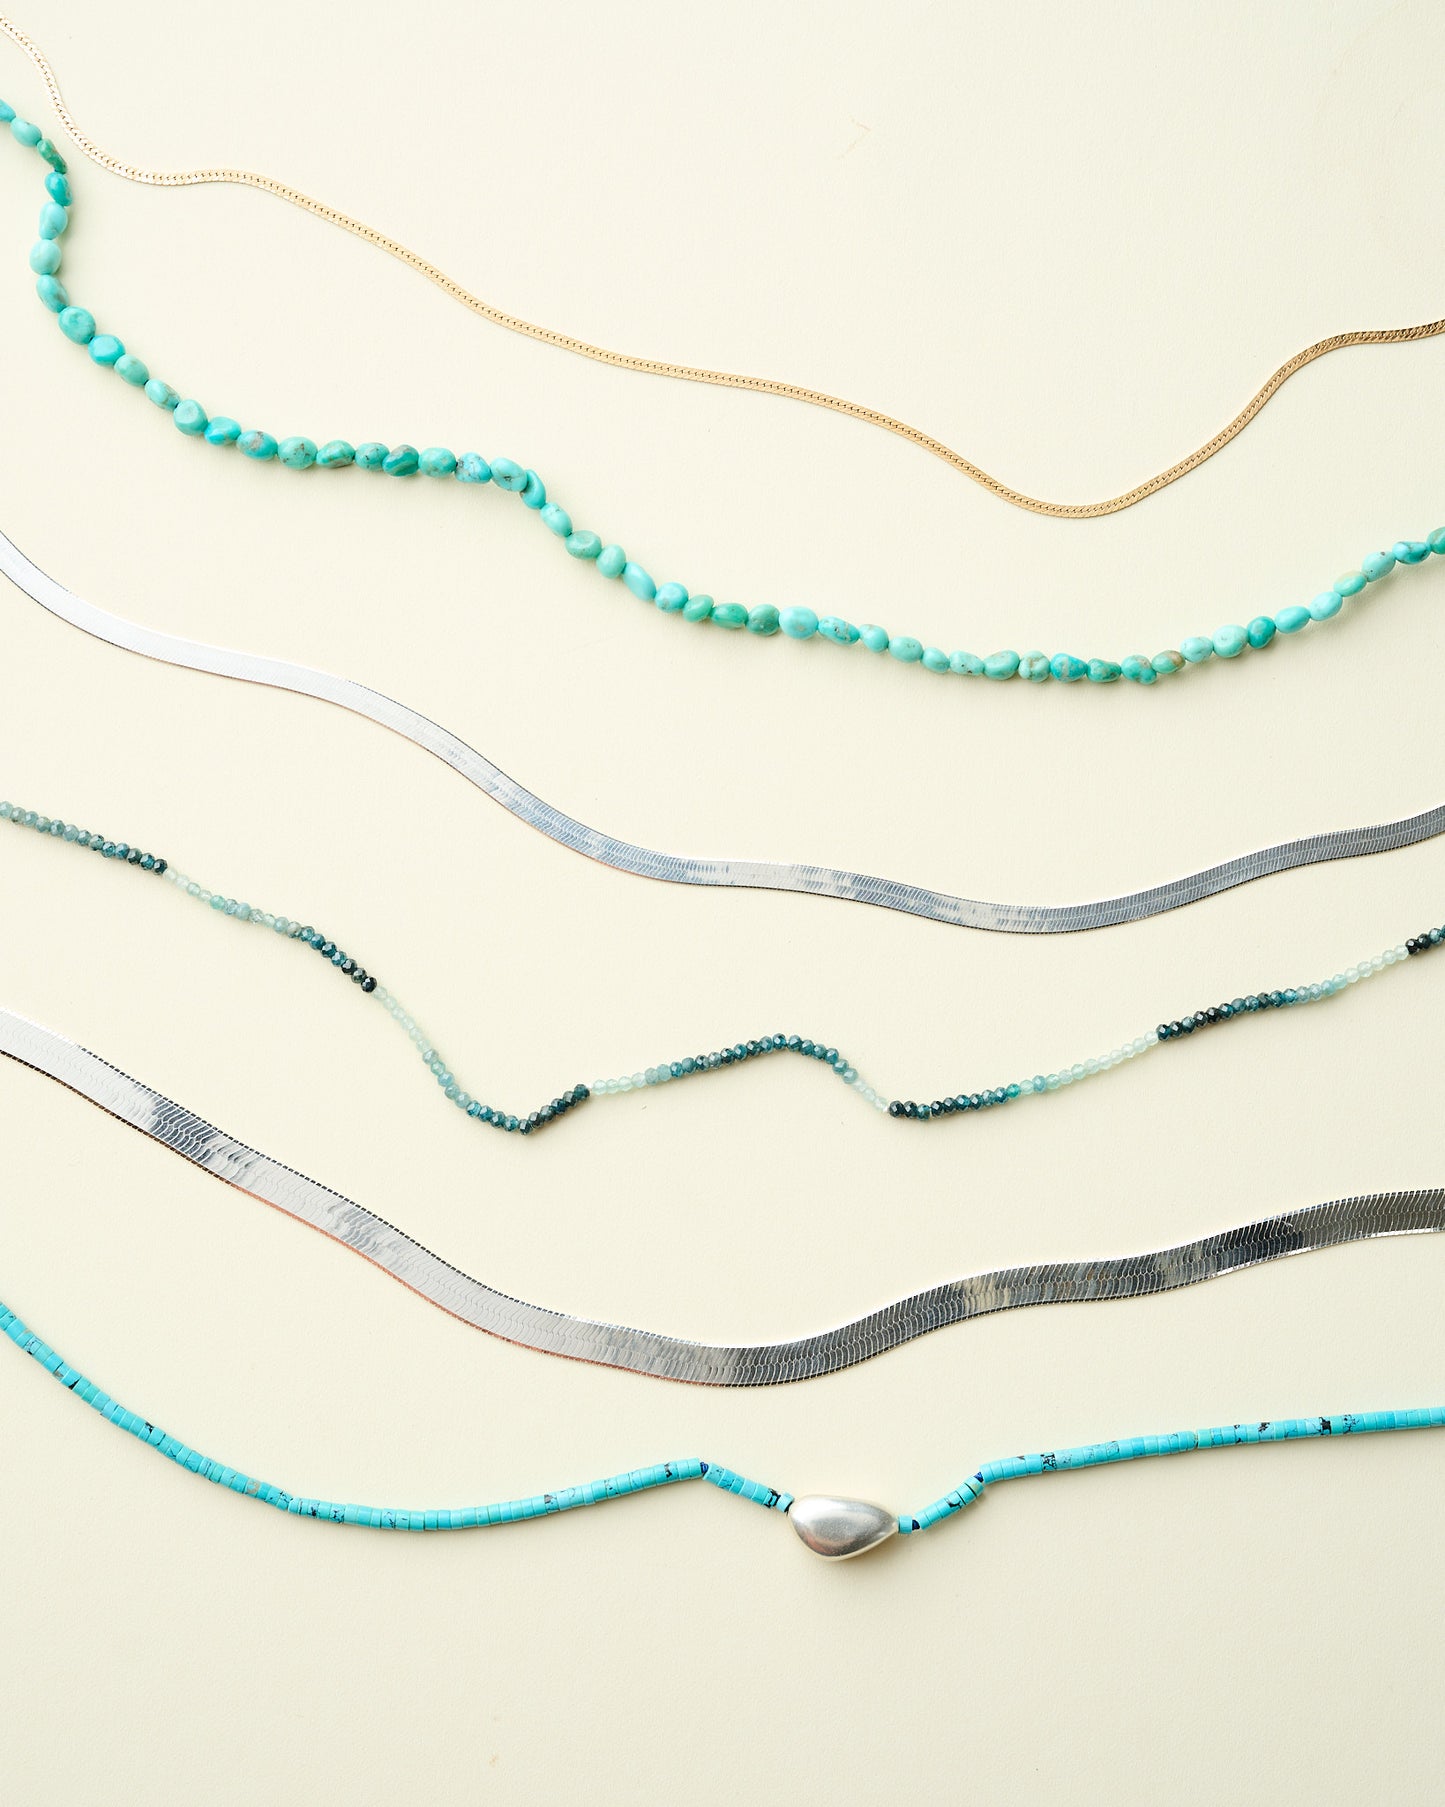 Turquoise Beaded Necklace with Silver Bean